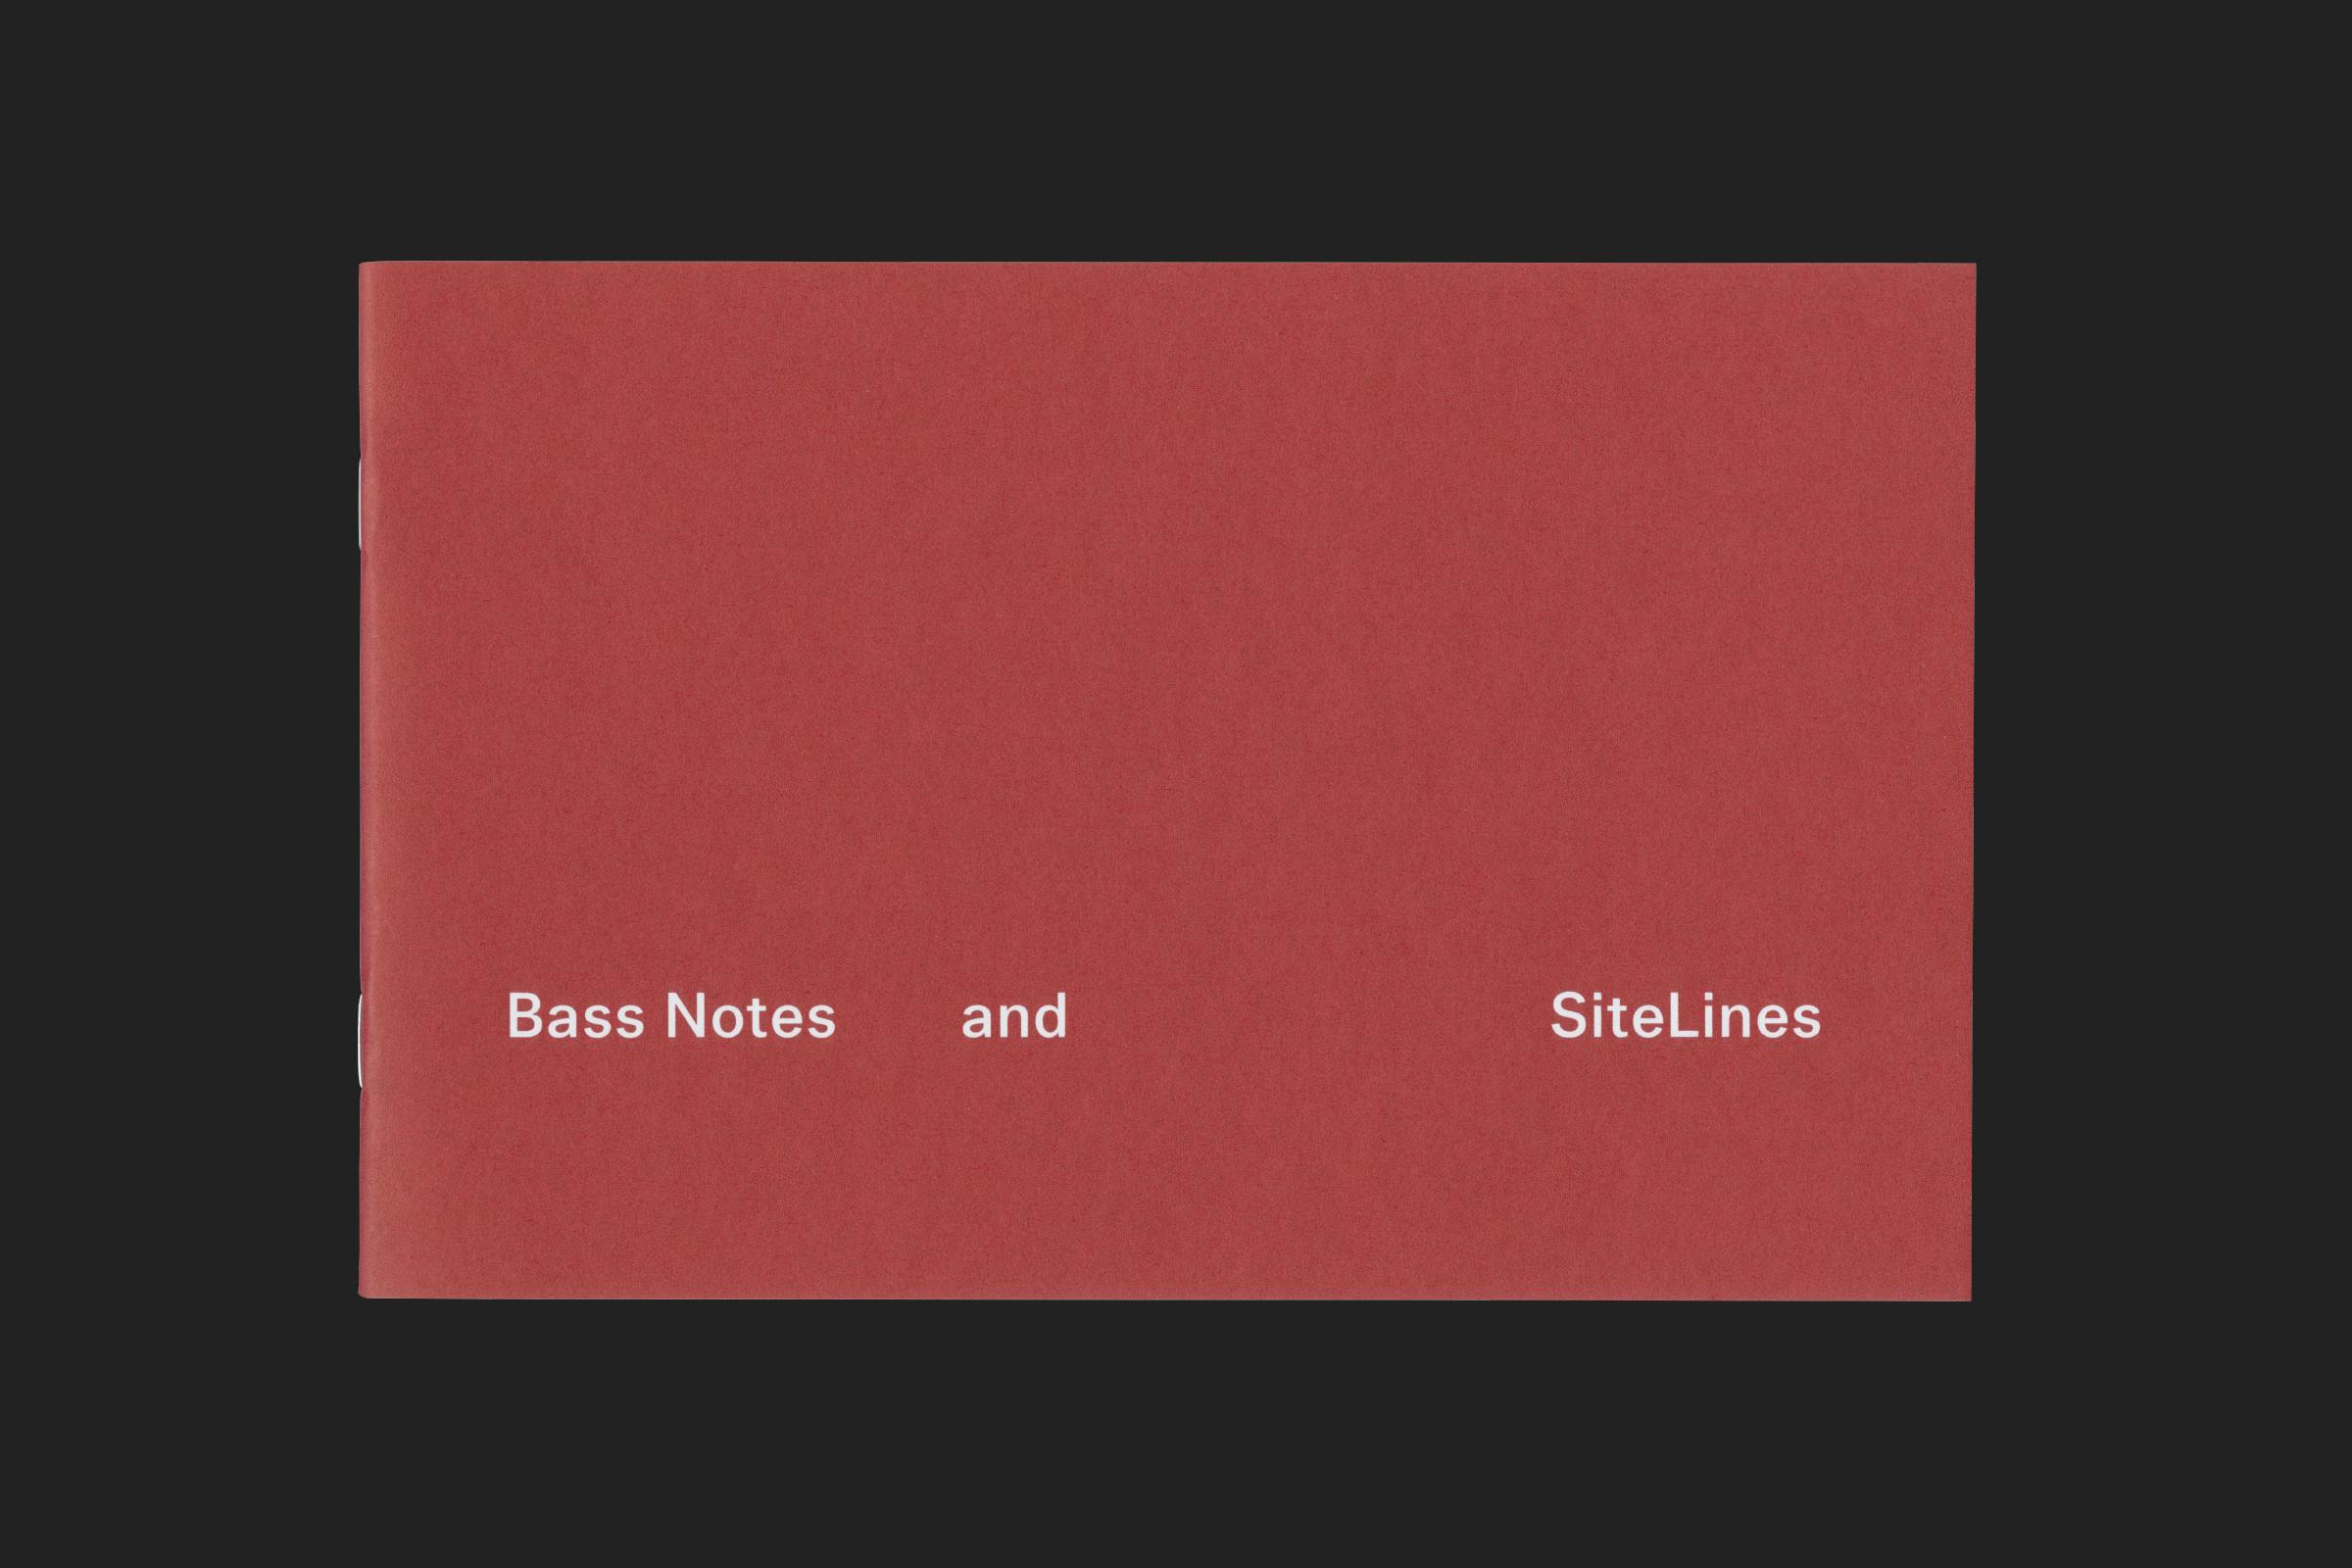 Serpentine Galleries, Helen Cammock, Bass Notes and SiteLines, Print, Graphic Design by Wolfe Hall